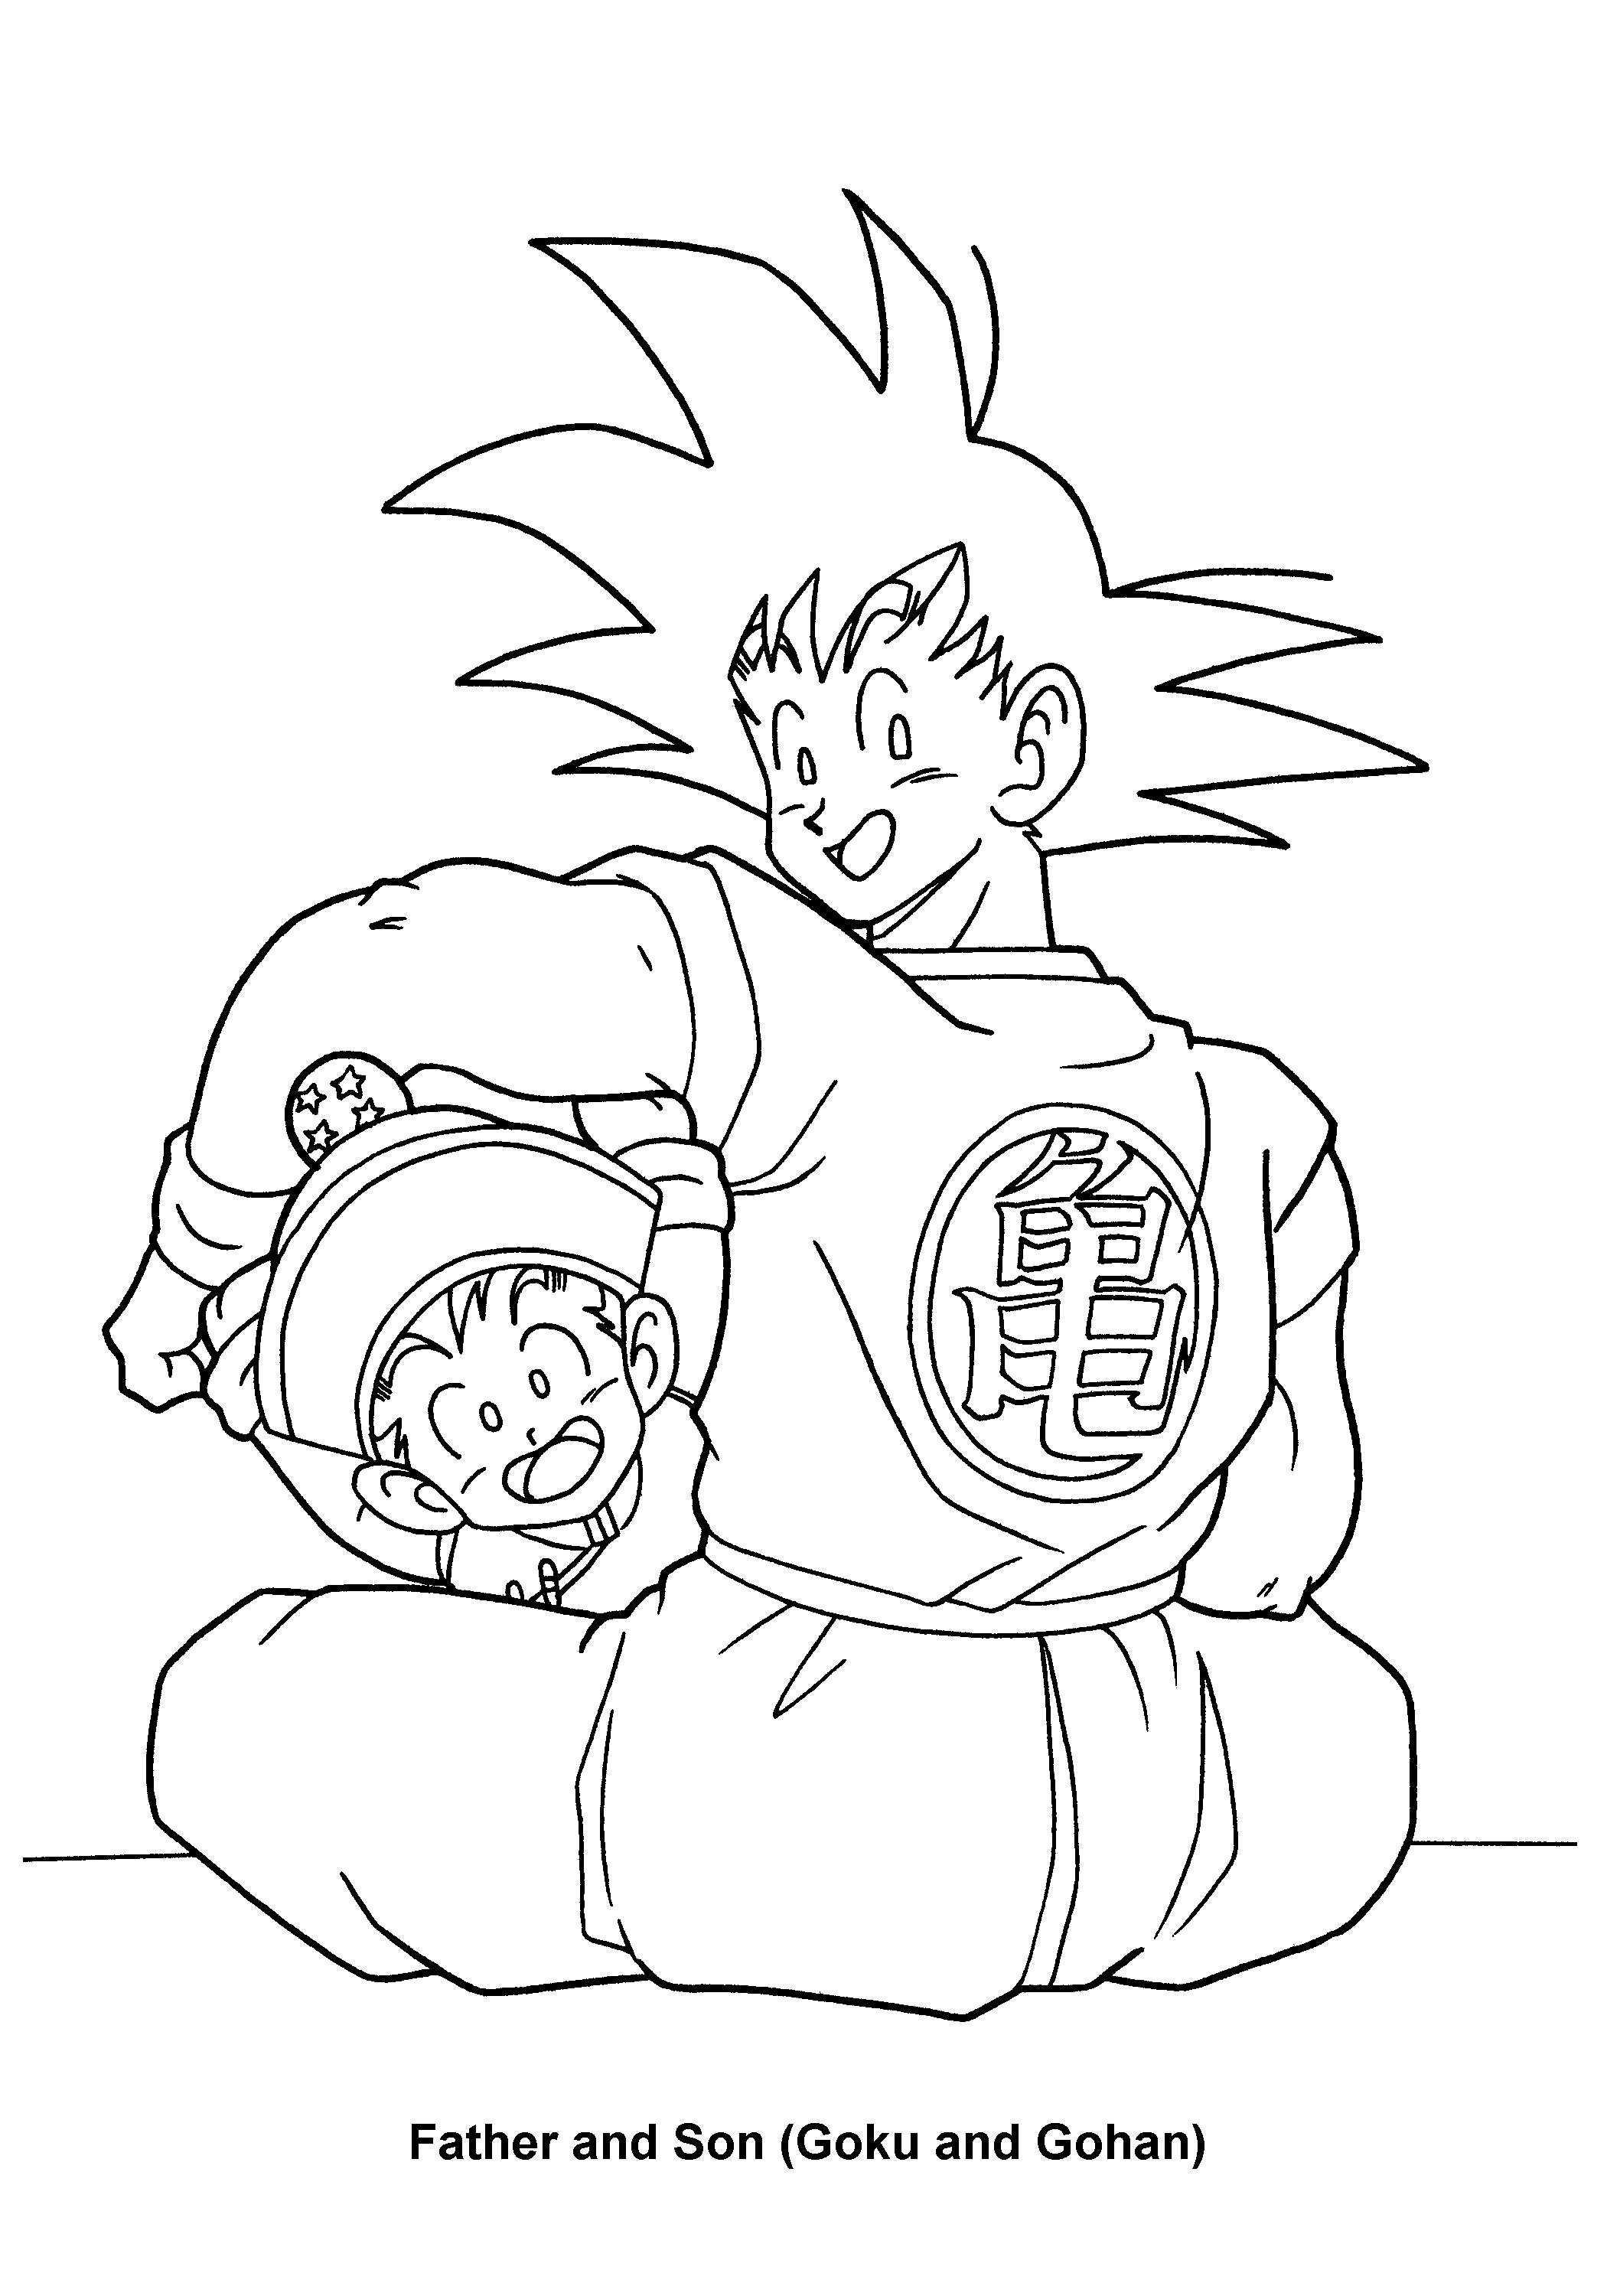 Coloring Page - Dragon ball z coloring pages 79